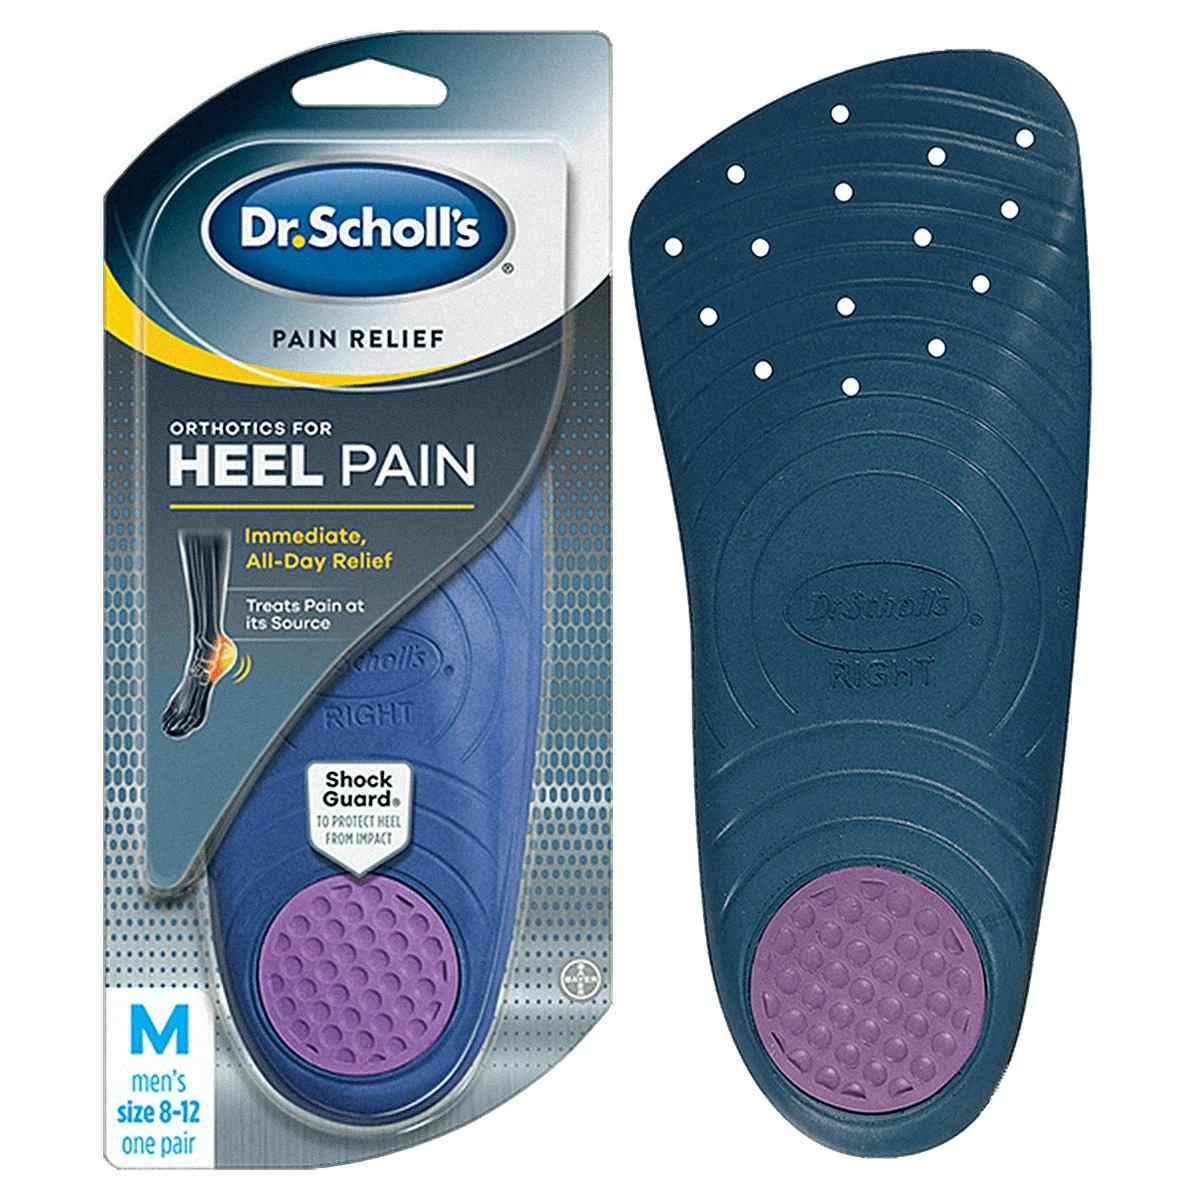 Dr. Scholl's Pain Relief Orthotics for Heel Pain, 85284630, Men's (Size 8-12) - Pack of 2